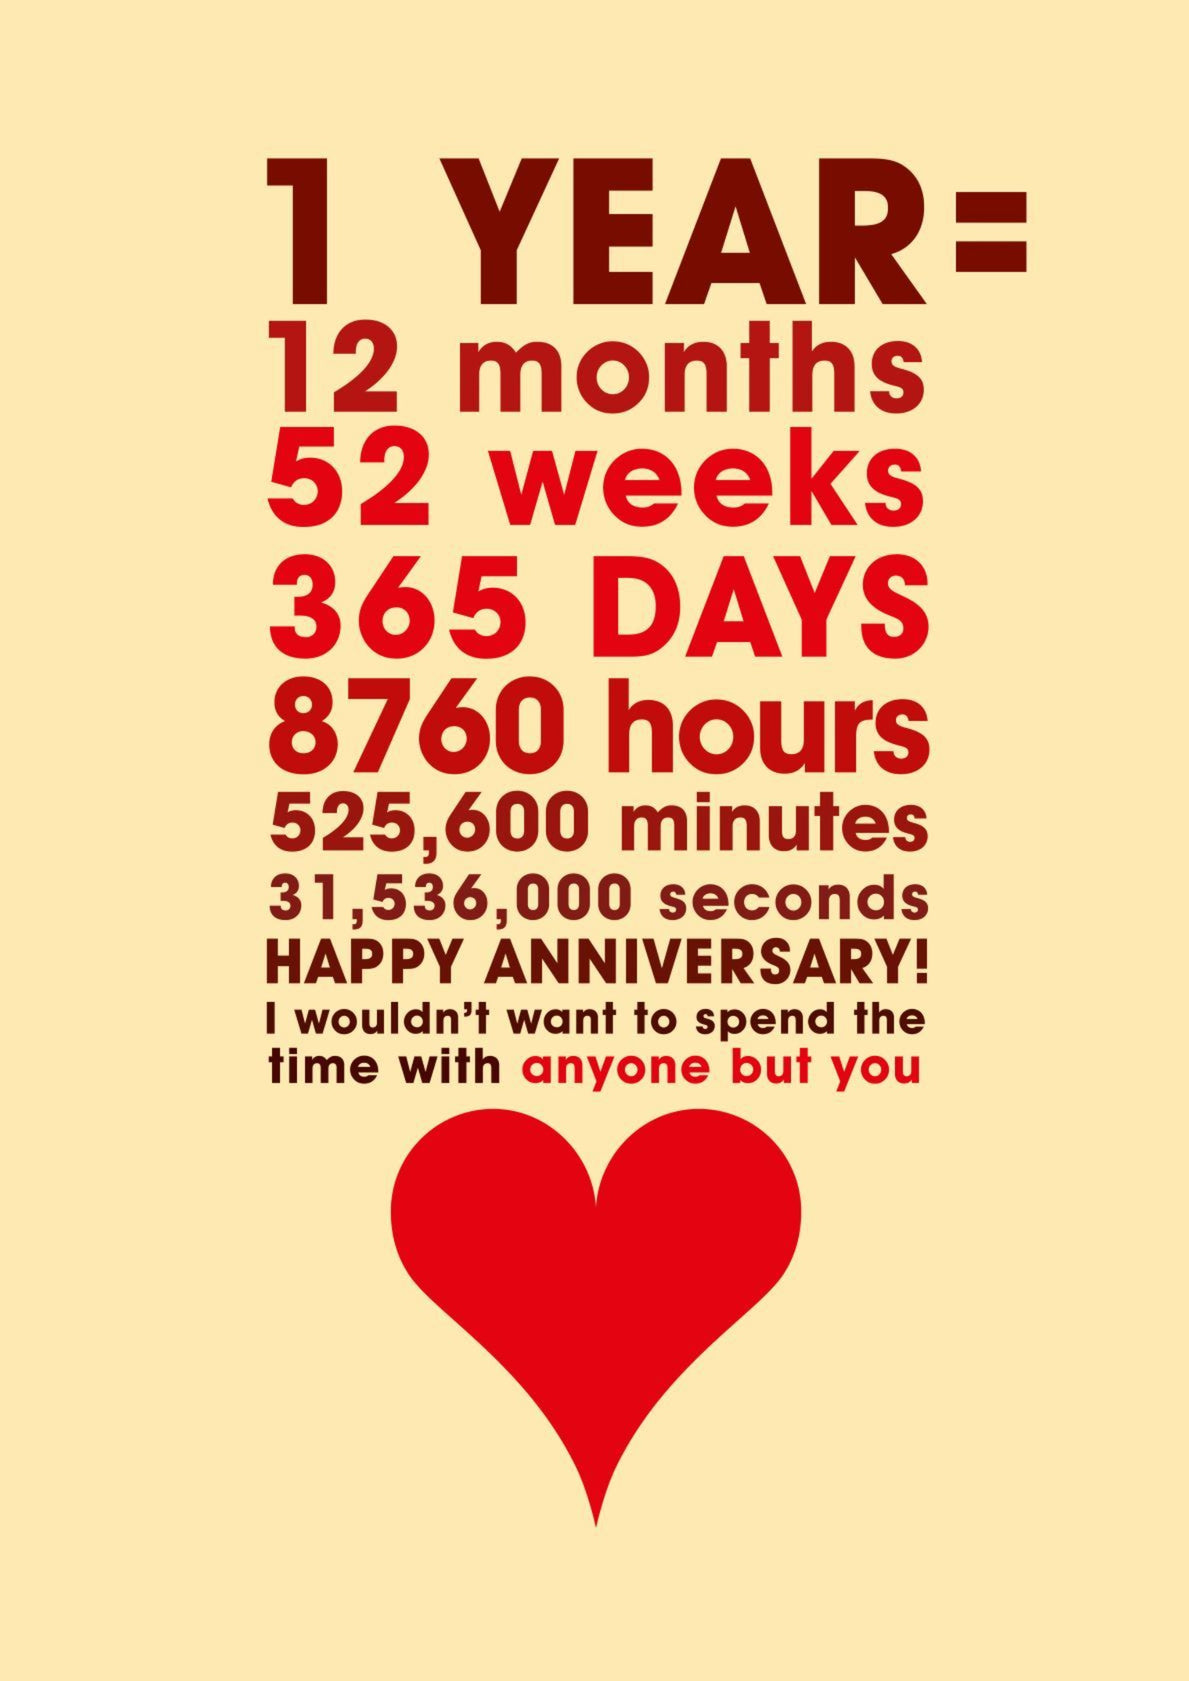 1 Year Happy Anniversary Image Daily Quotes